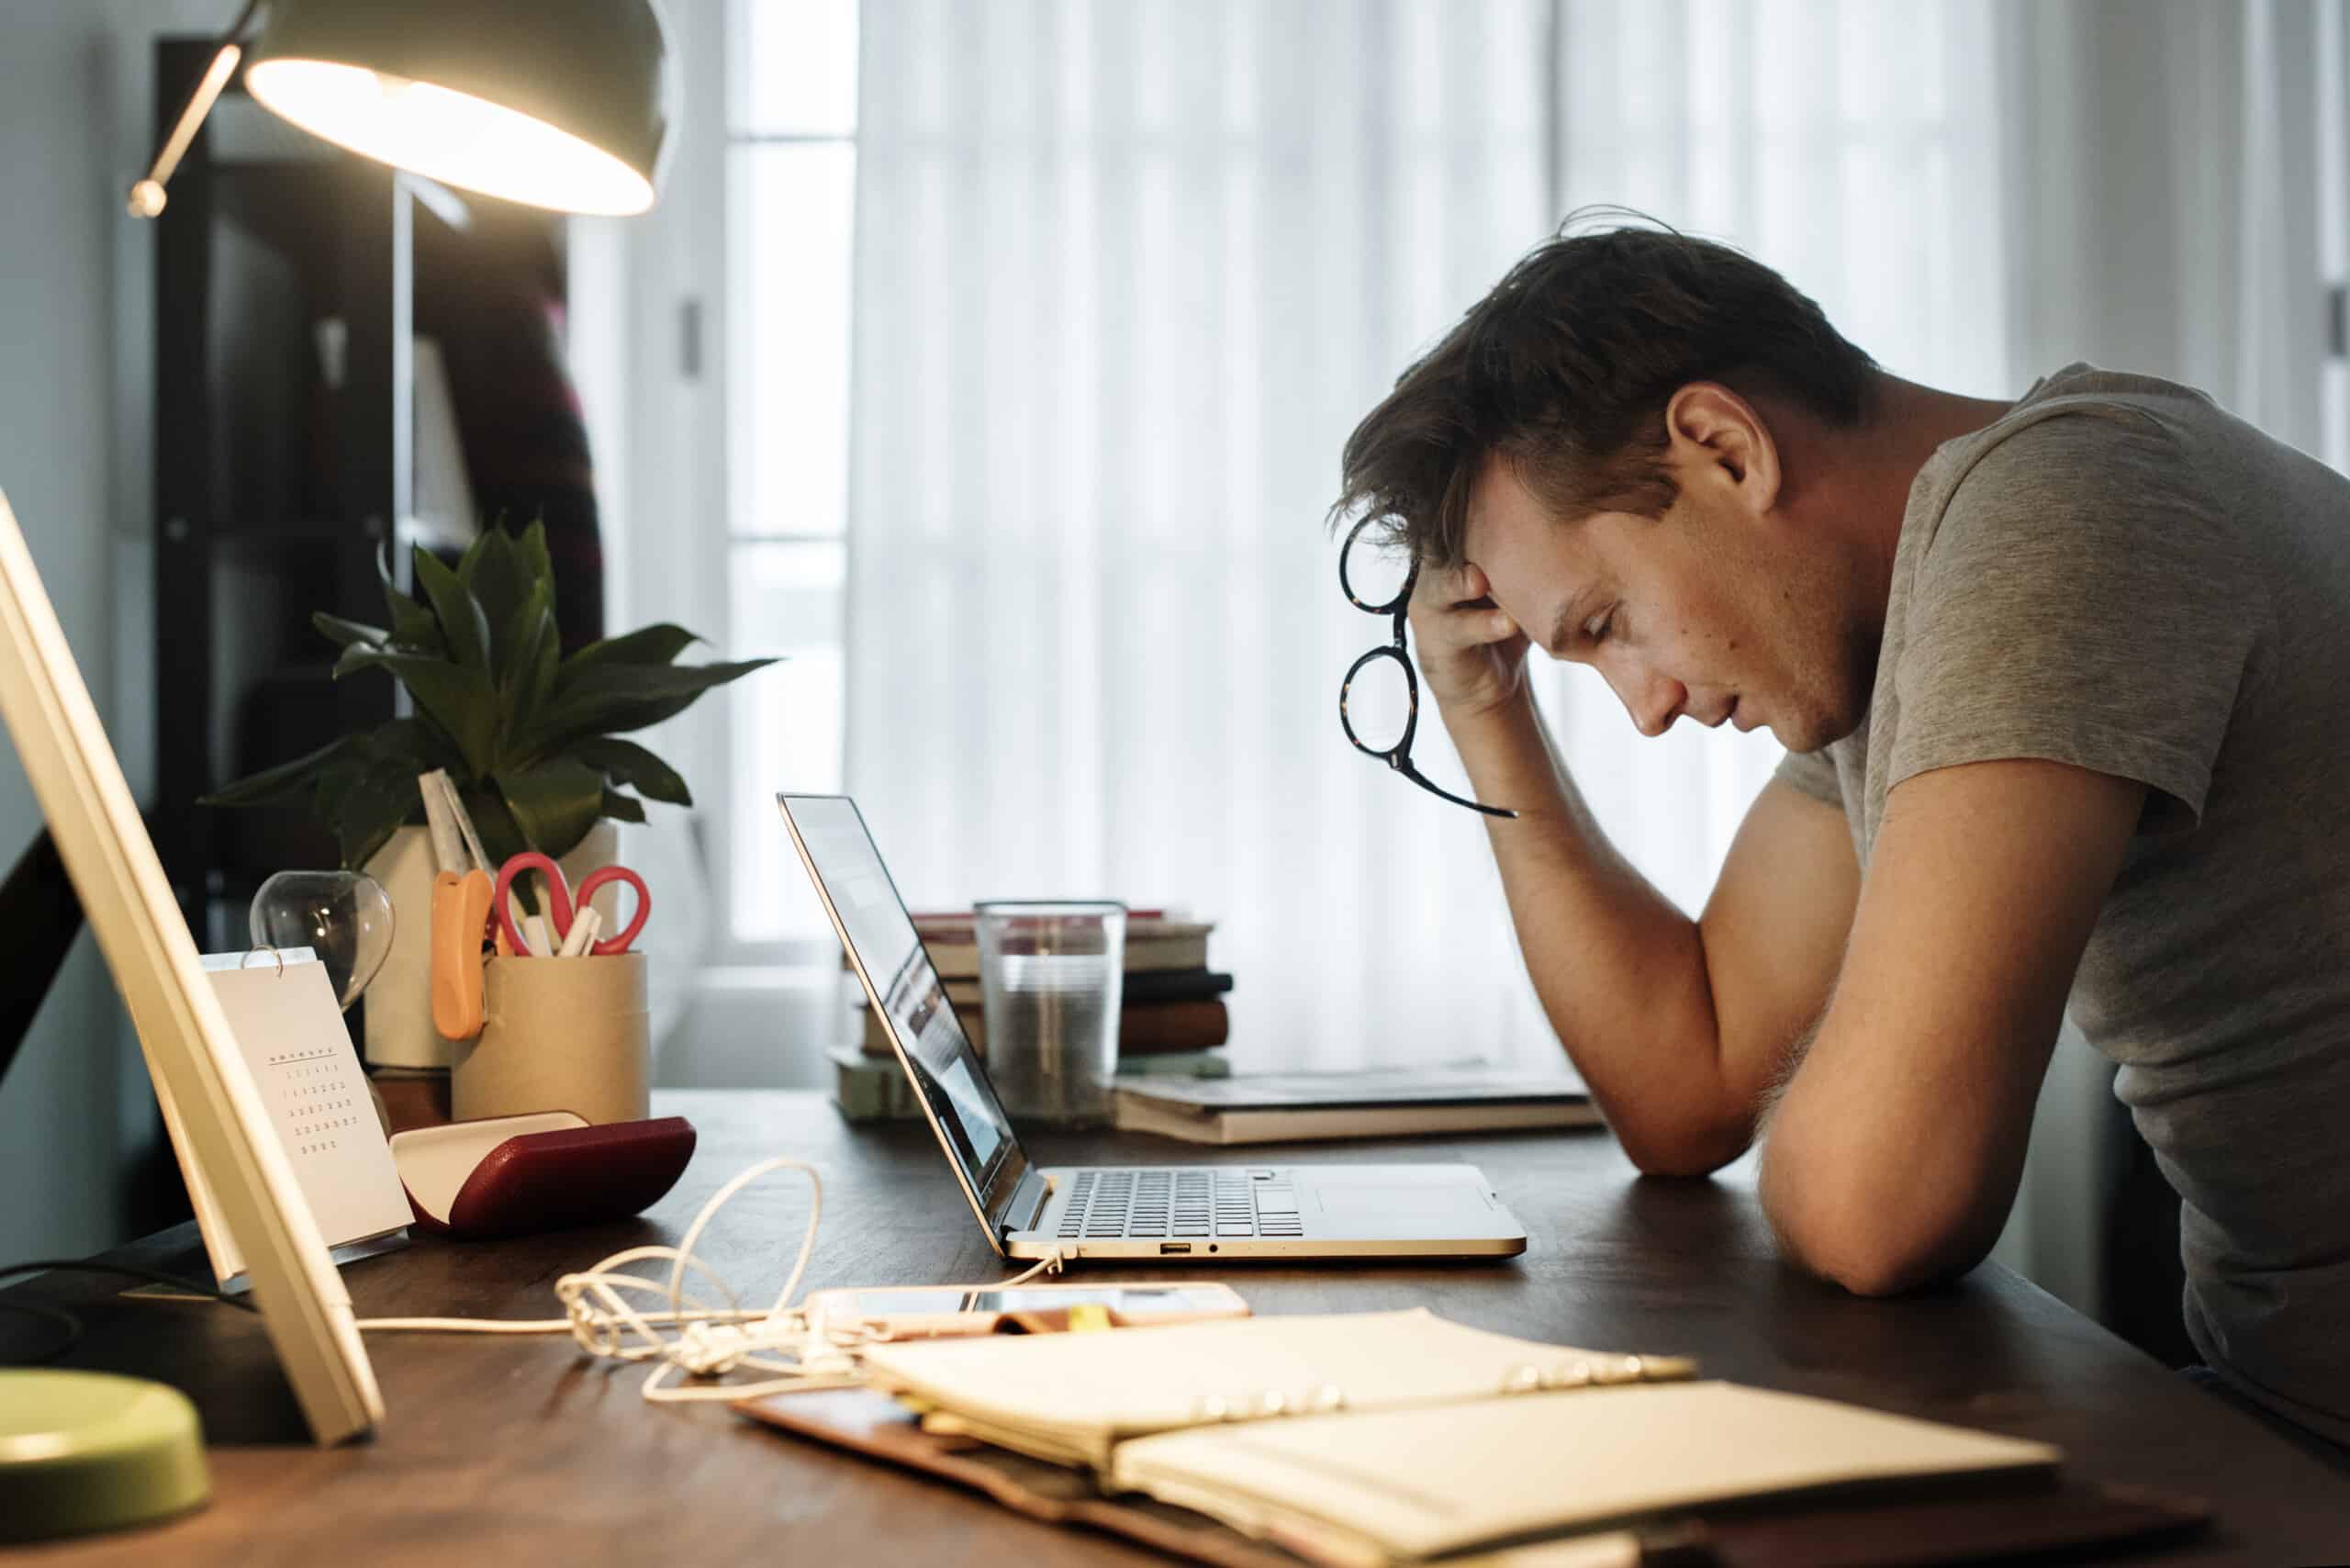 Stress can cause lower testosterone levels